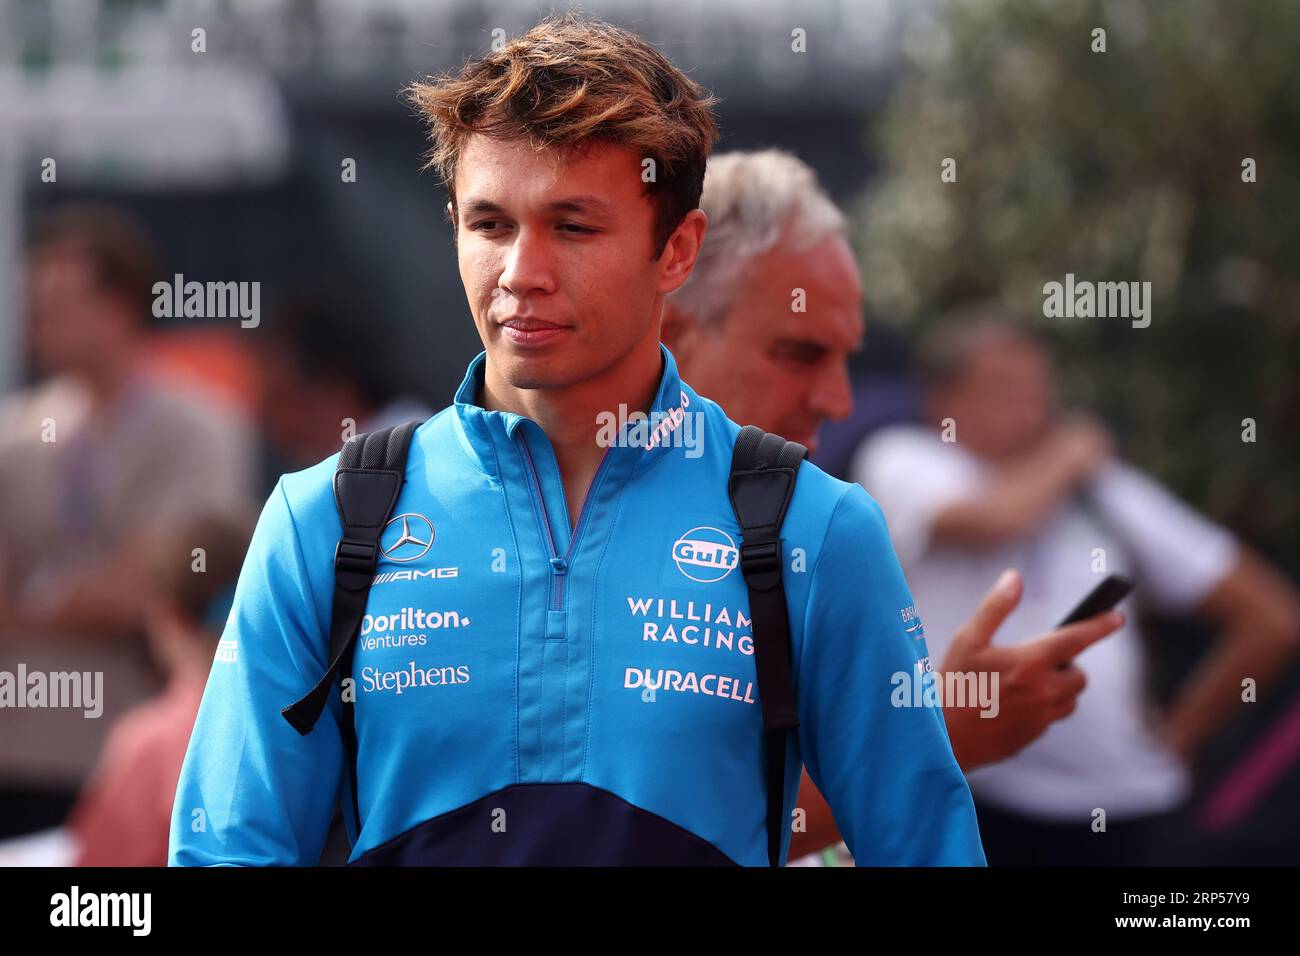 Monza, Italy. 03rd Sep, 2023. Alexander Albon of Williams Racing during the F1 Grand Prix of Italy at Autodromo Nazionale on September 3, 2023 Monza, Italy. Credit: Marco Canoniero/Alamy Live News Stock Photo